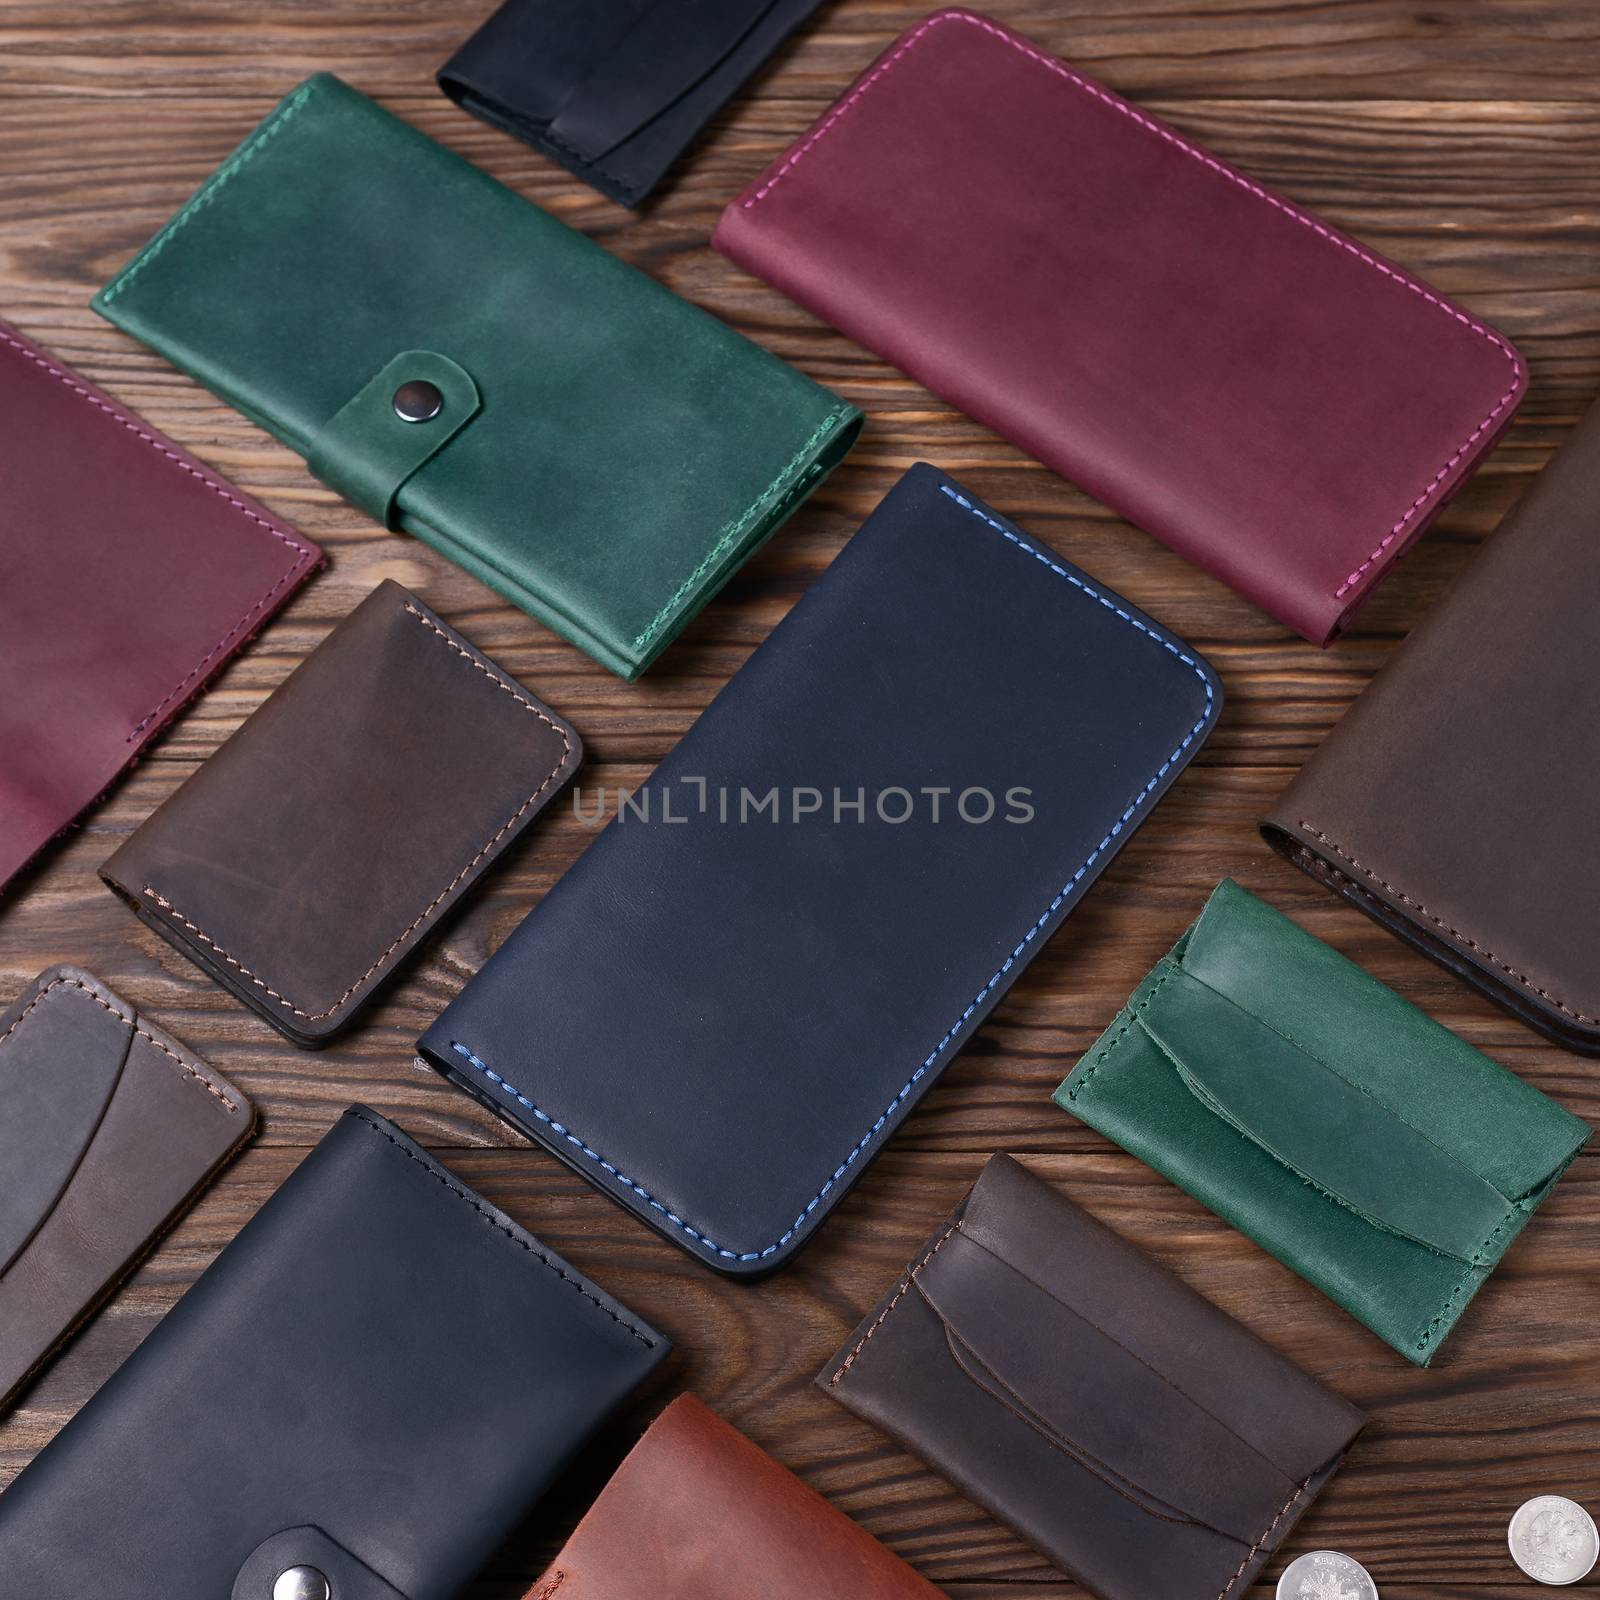 Blue color handmade leather porte-monnaie surrounded by other leather accessories on wooden textured background. Side view. Stock photo of luxury accessories. by alexsdriver